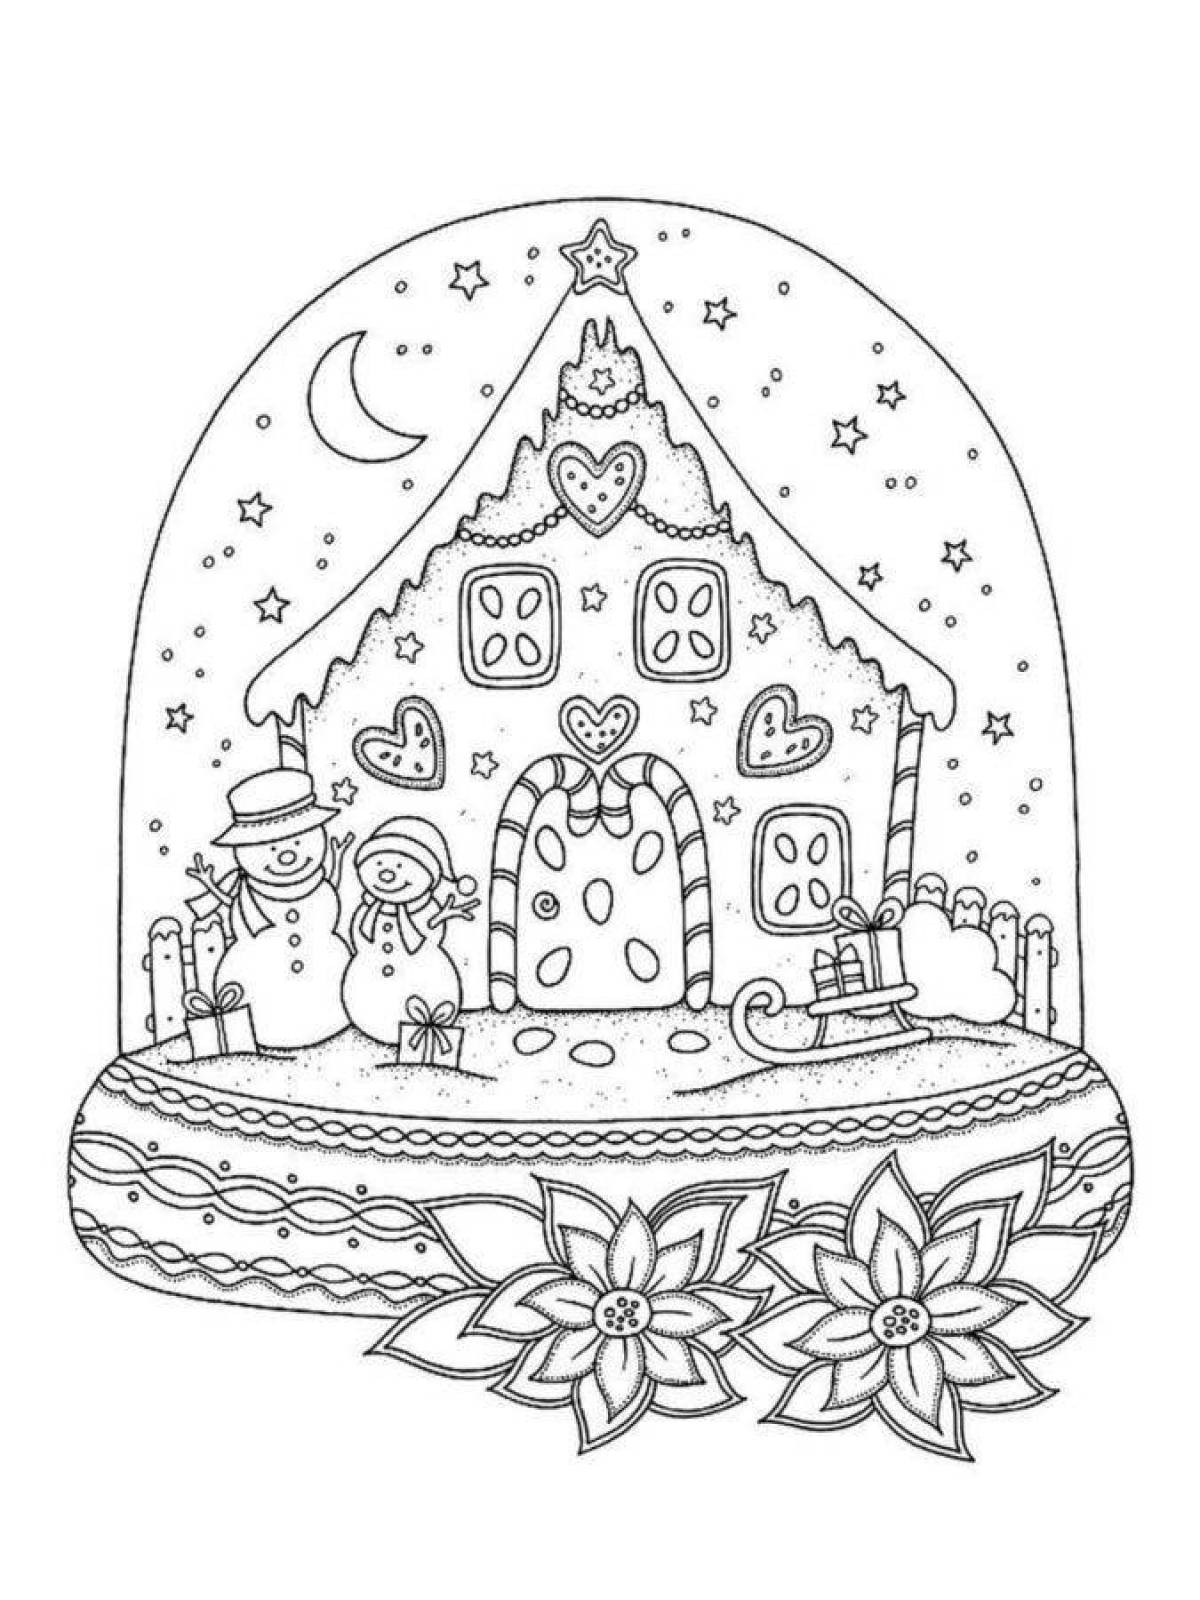 Ornate Christmas intricate coloring book